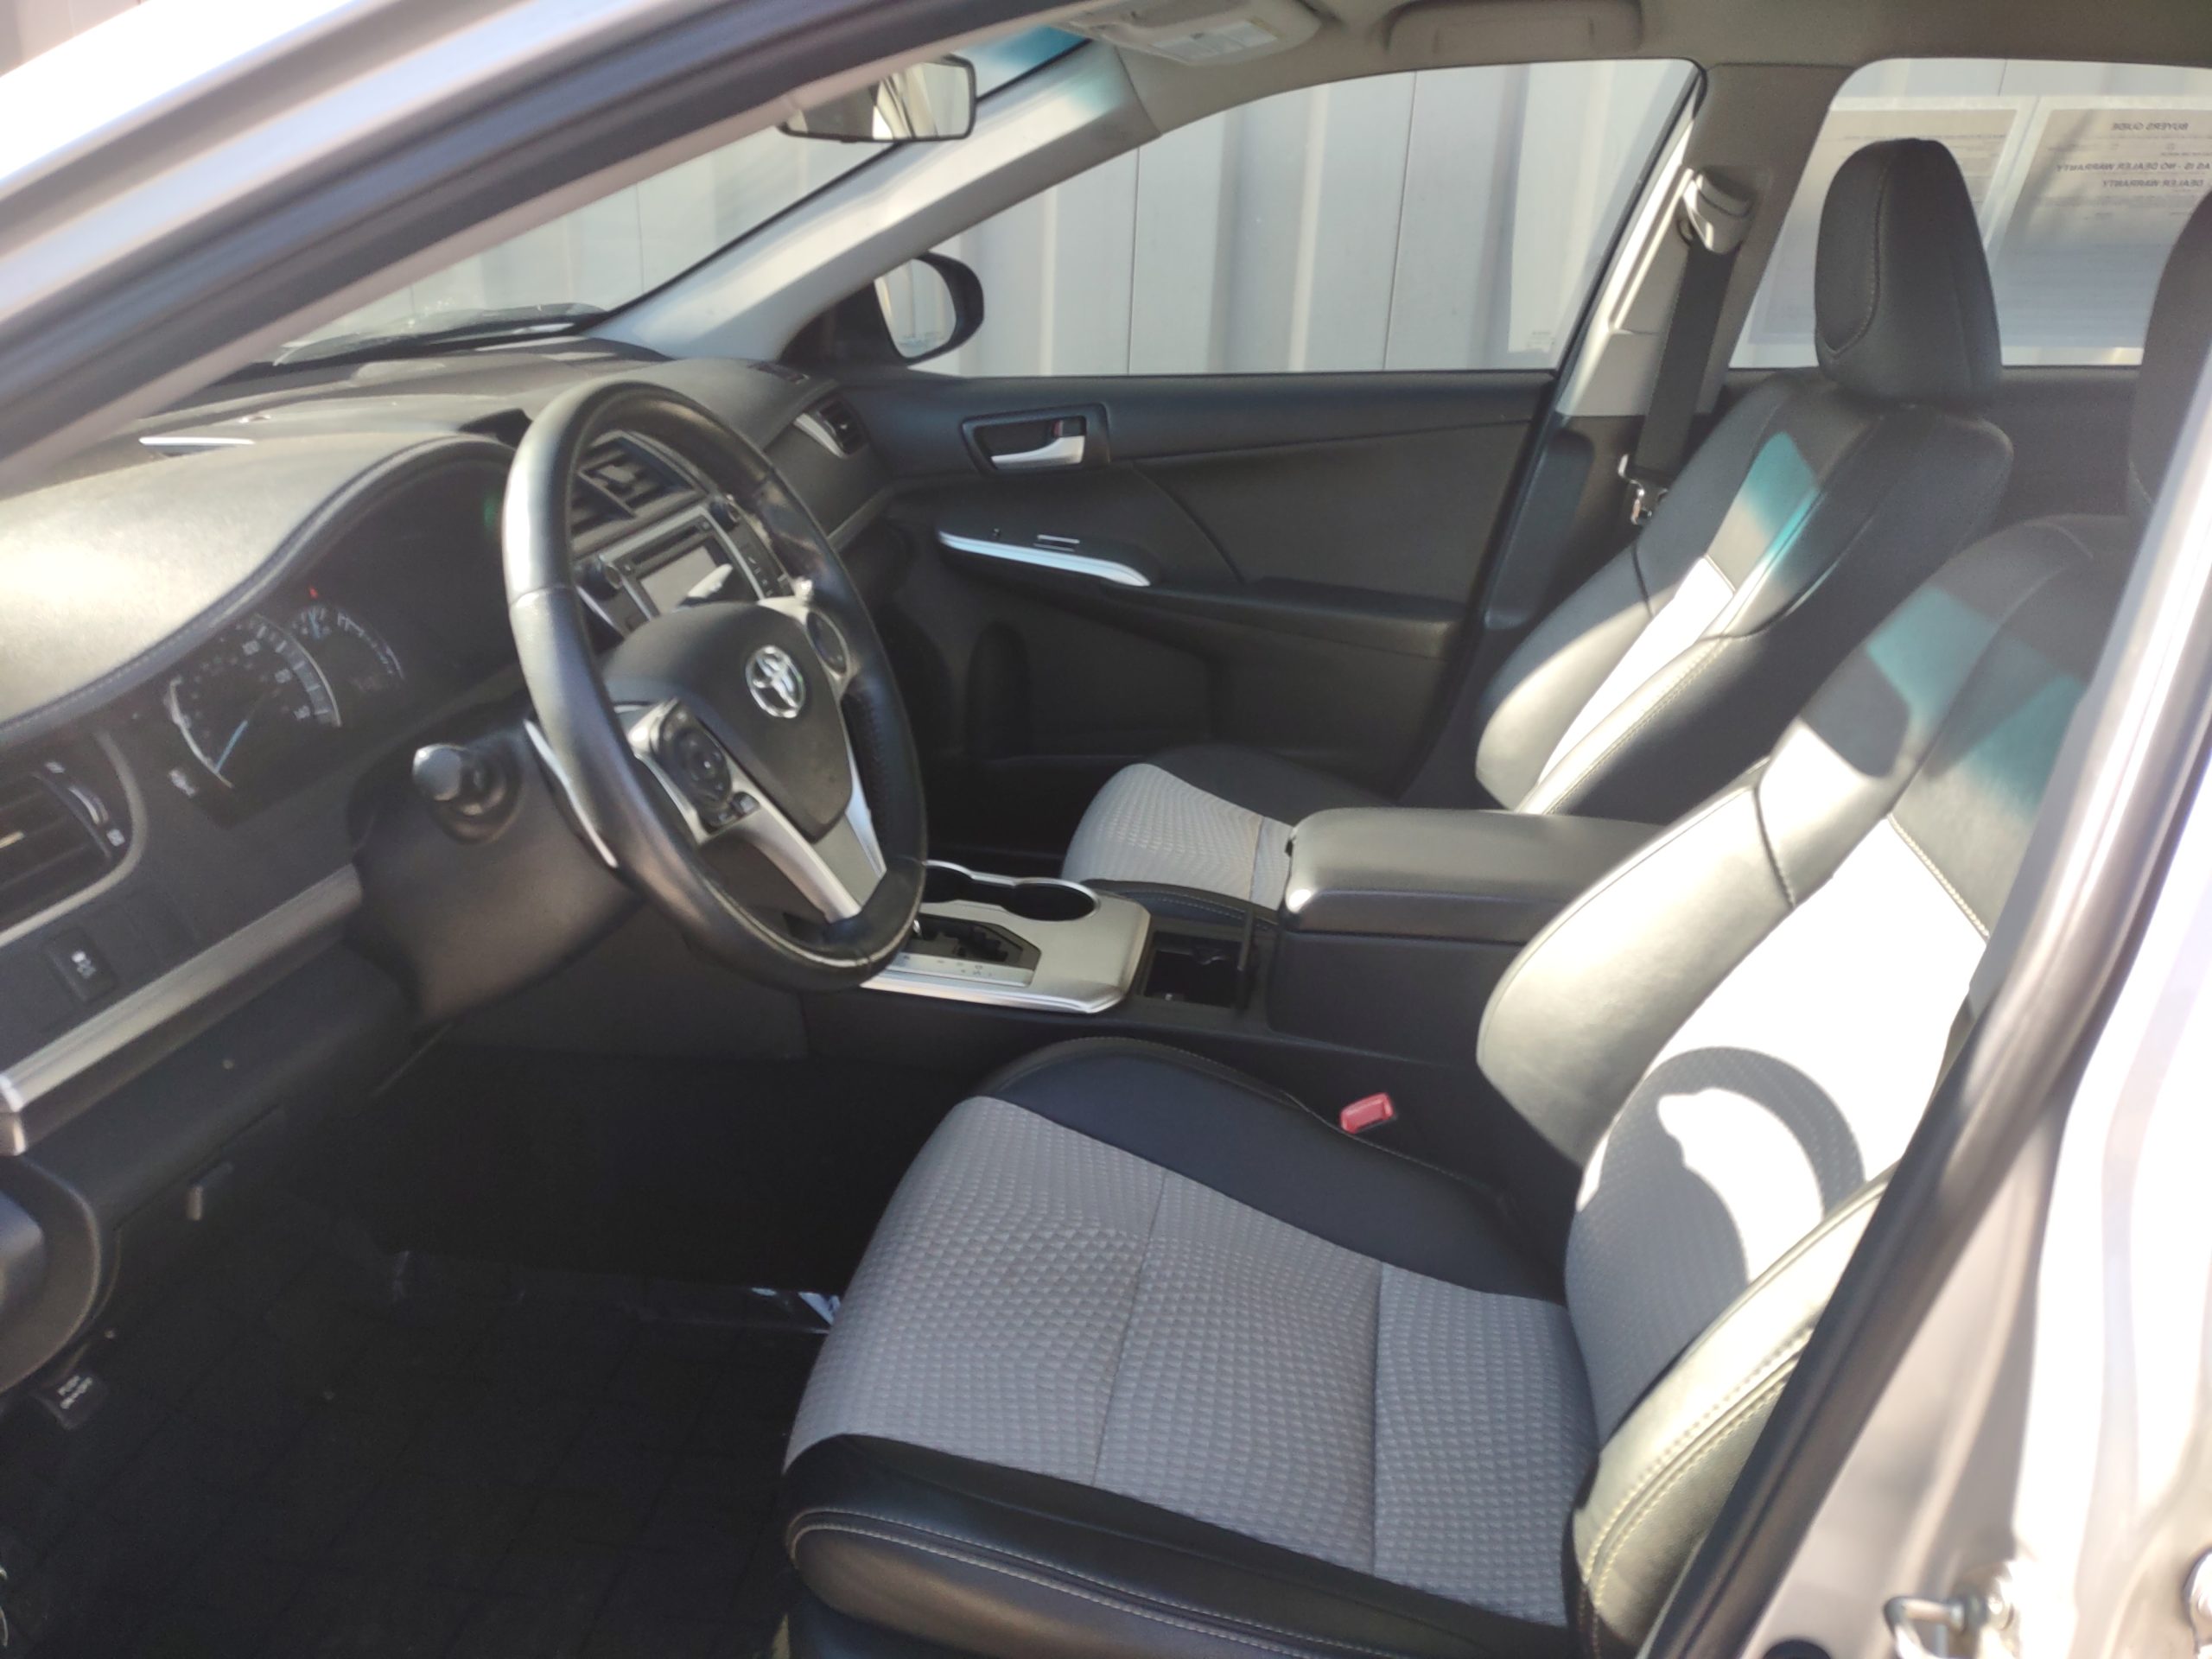 Used 2014 Toyota Camry SE Sedan for sale in 